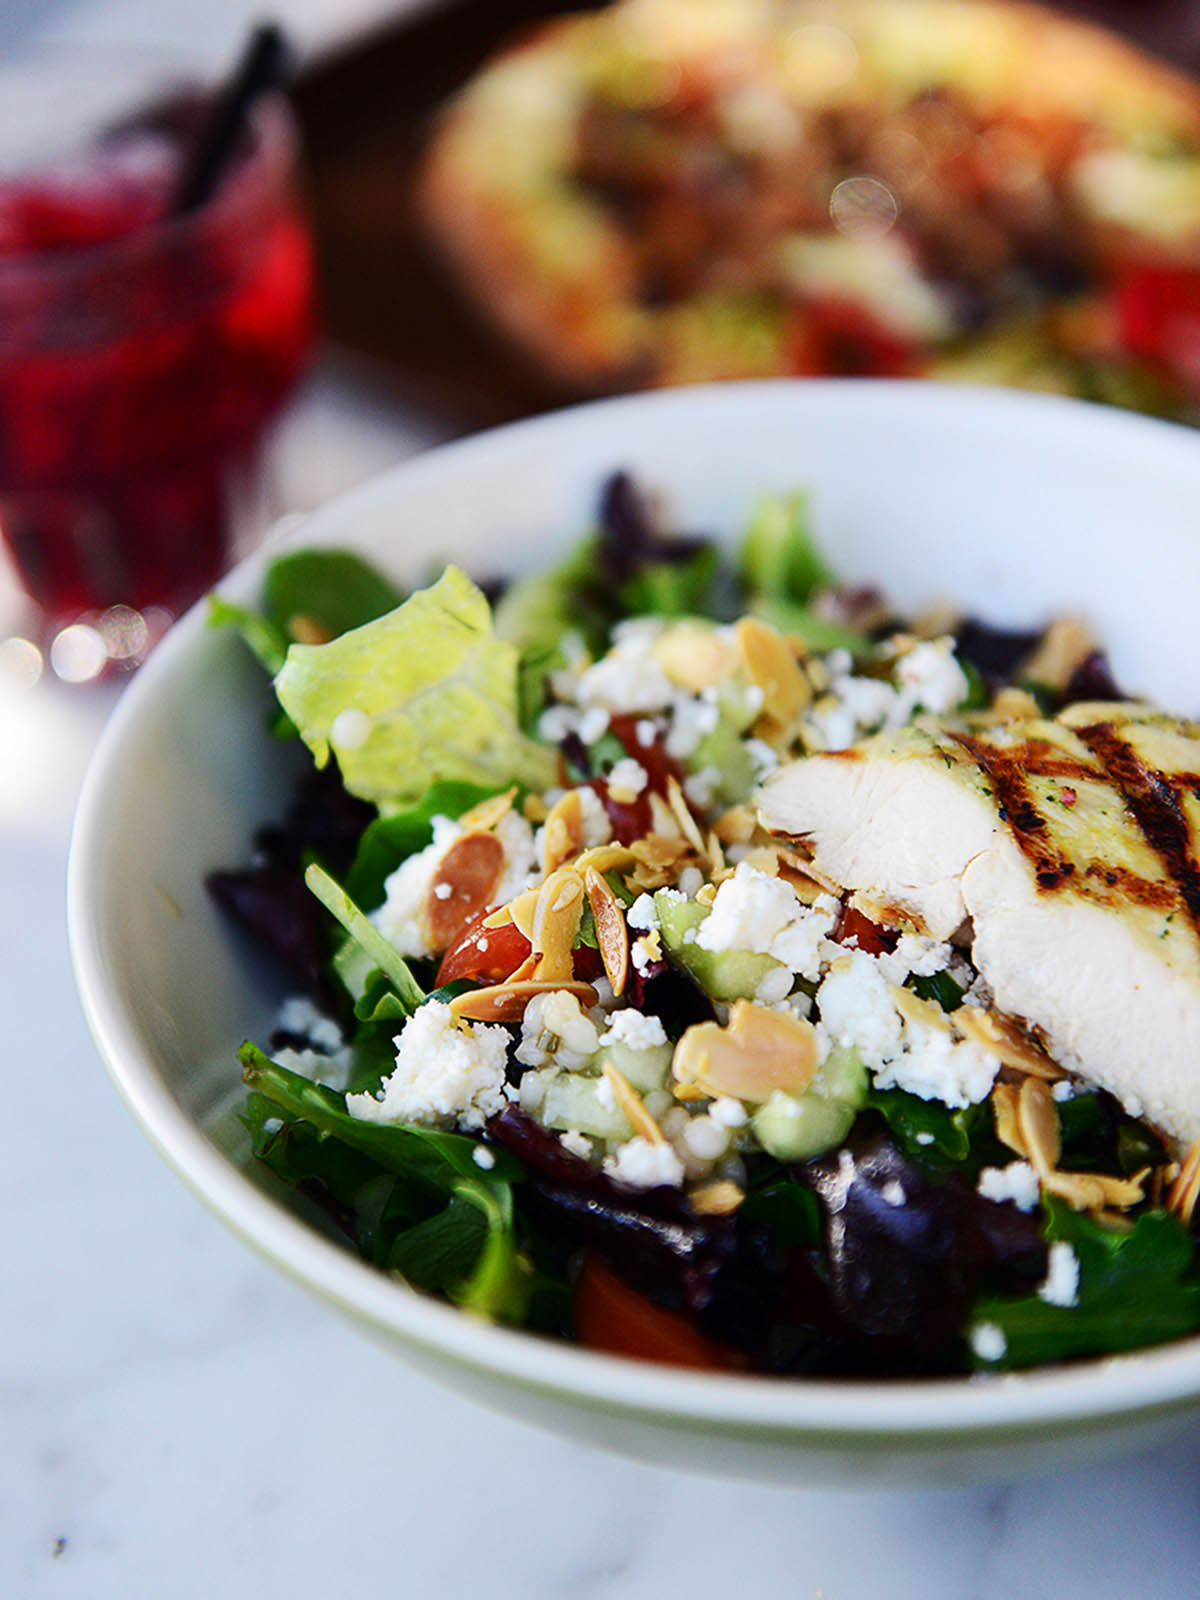 Picture of a salad with grilled chicken.